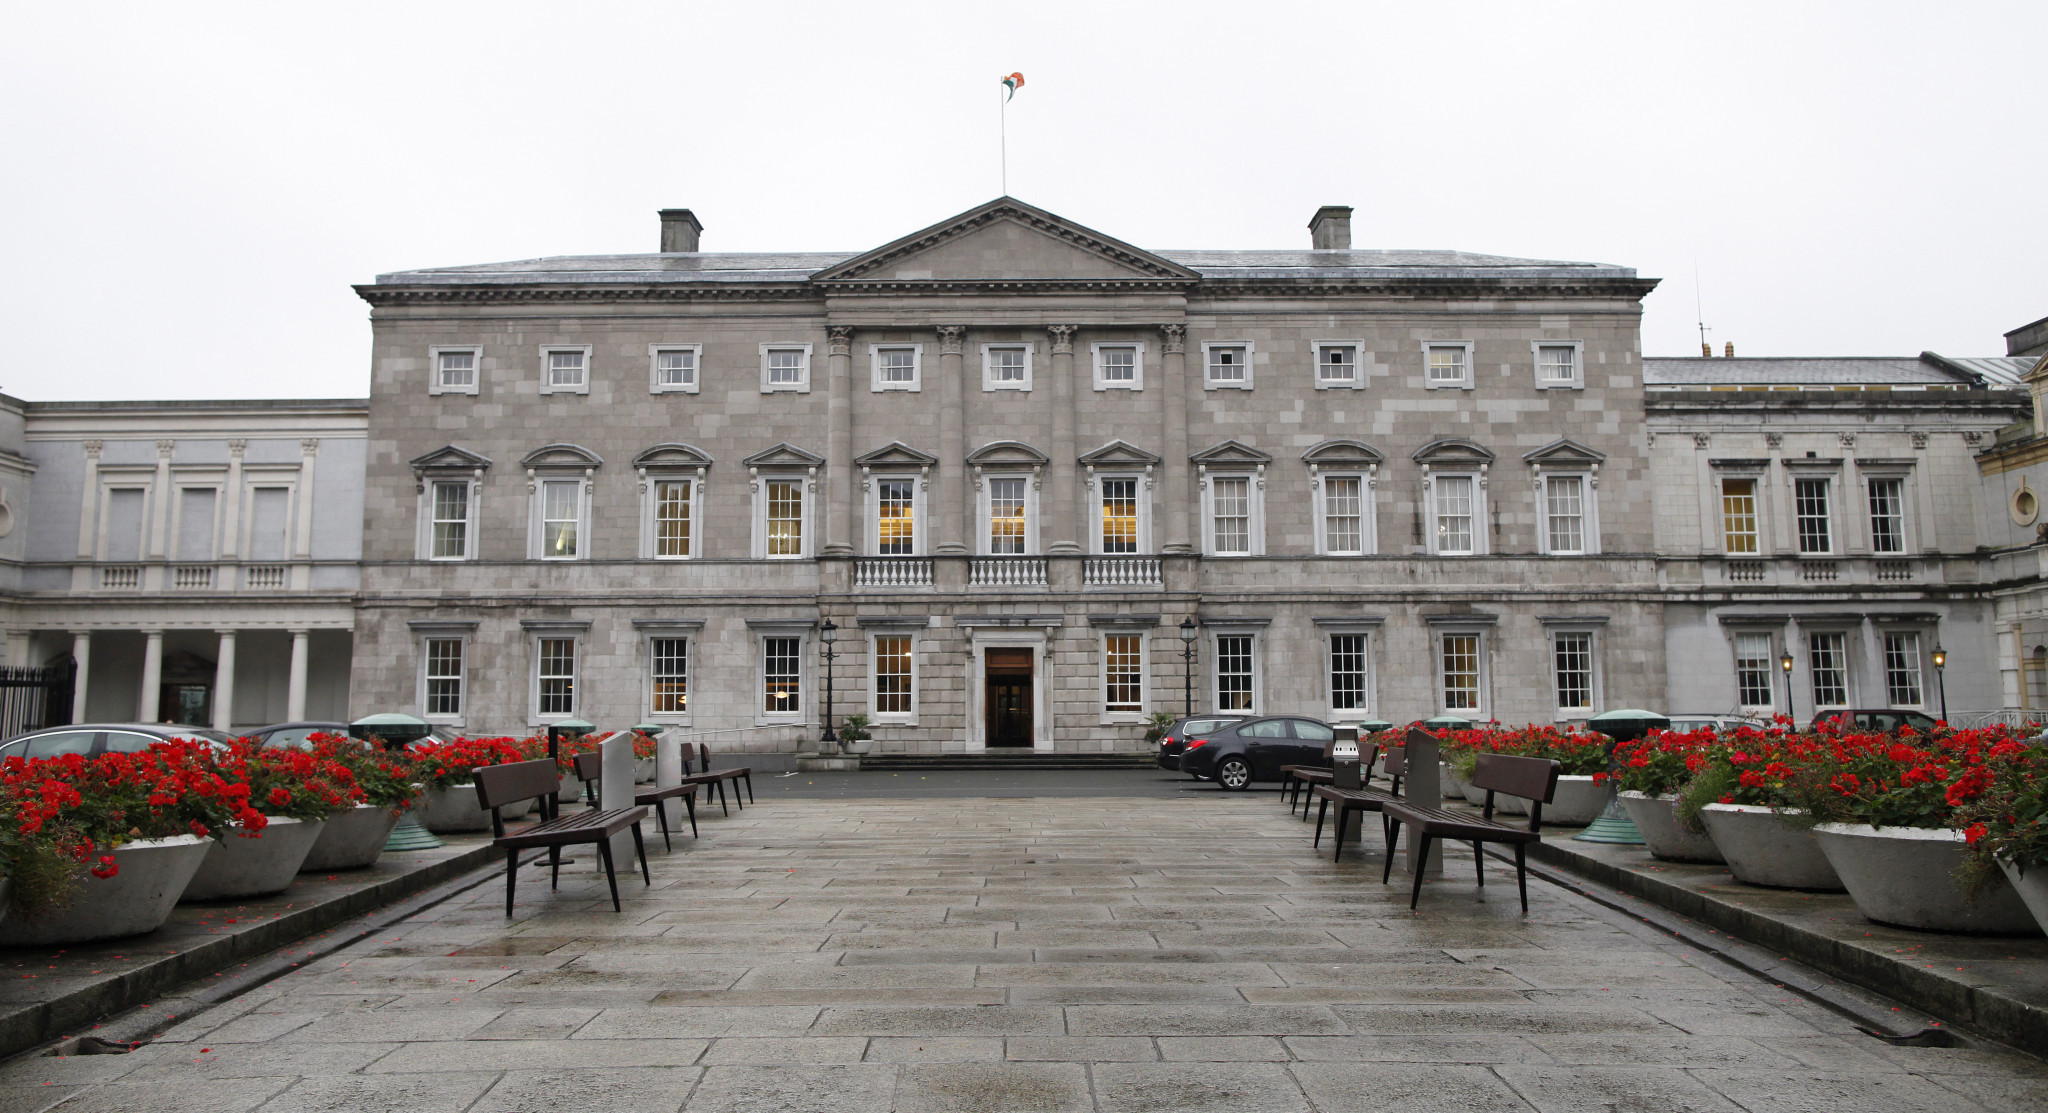 Legislation requiring proof of vaccination status passed through the Dáil Éireann earlier this week ©Getty Images